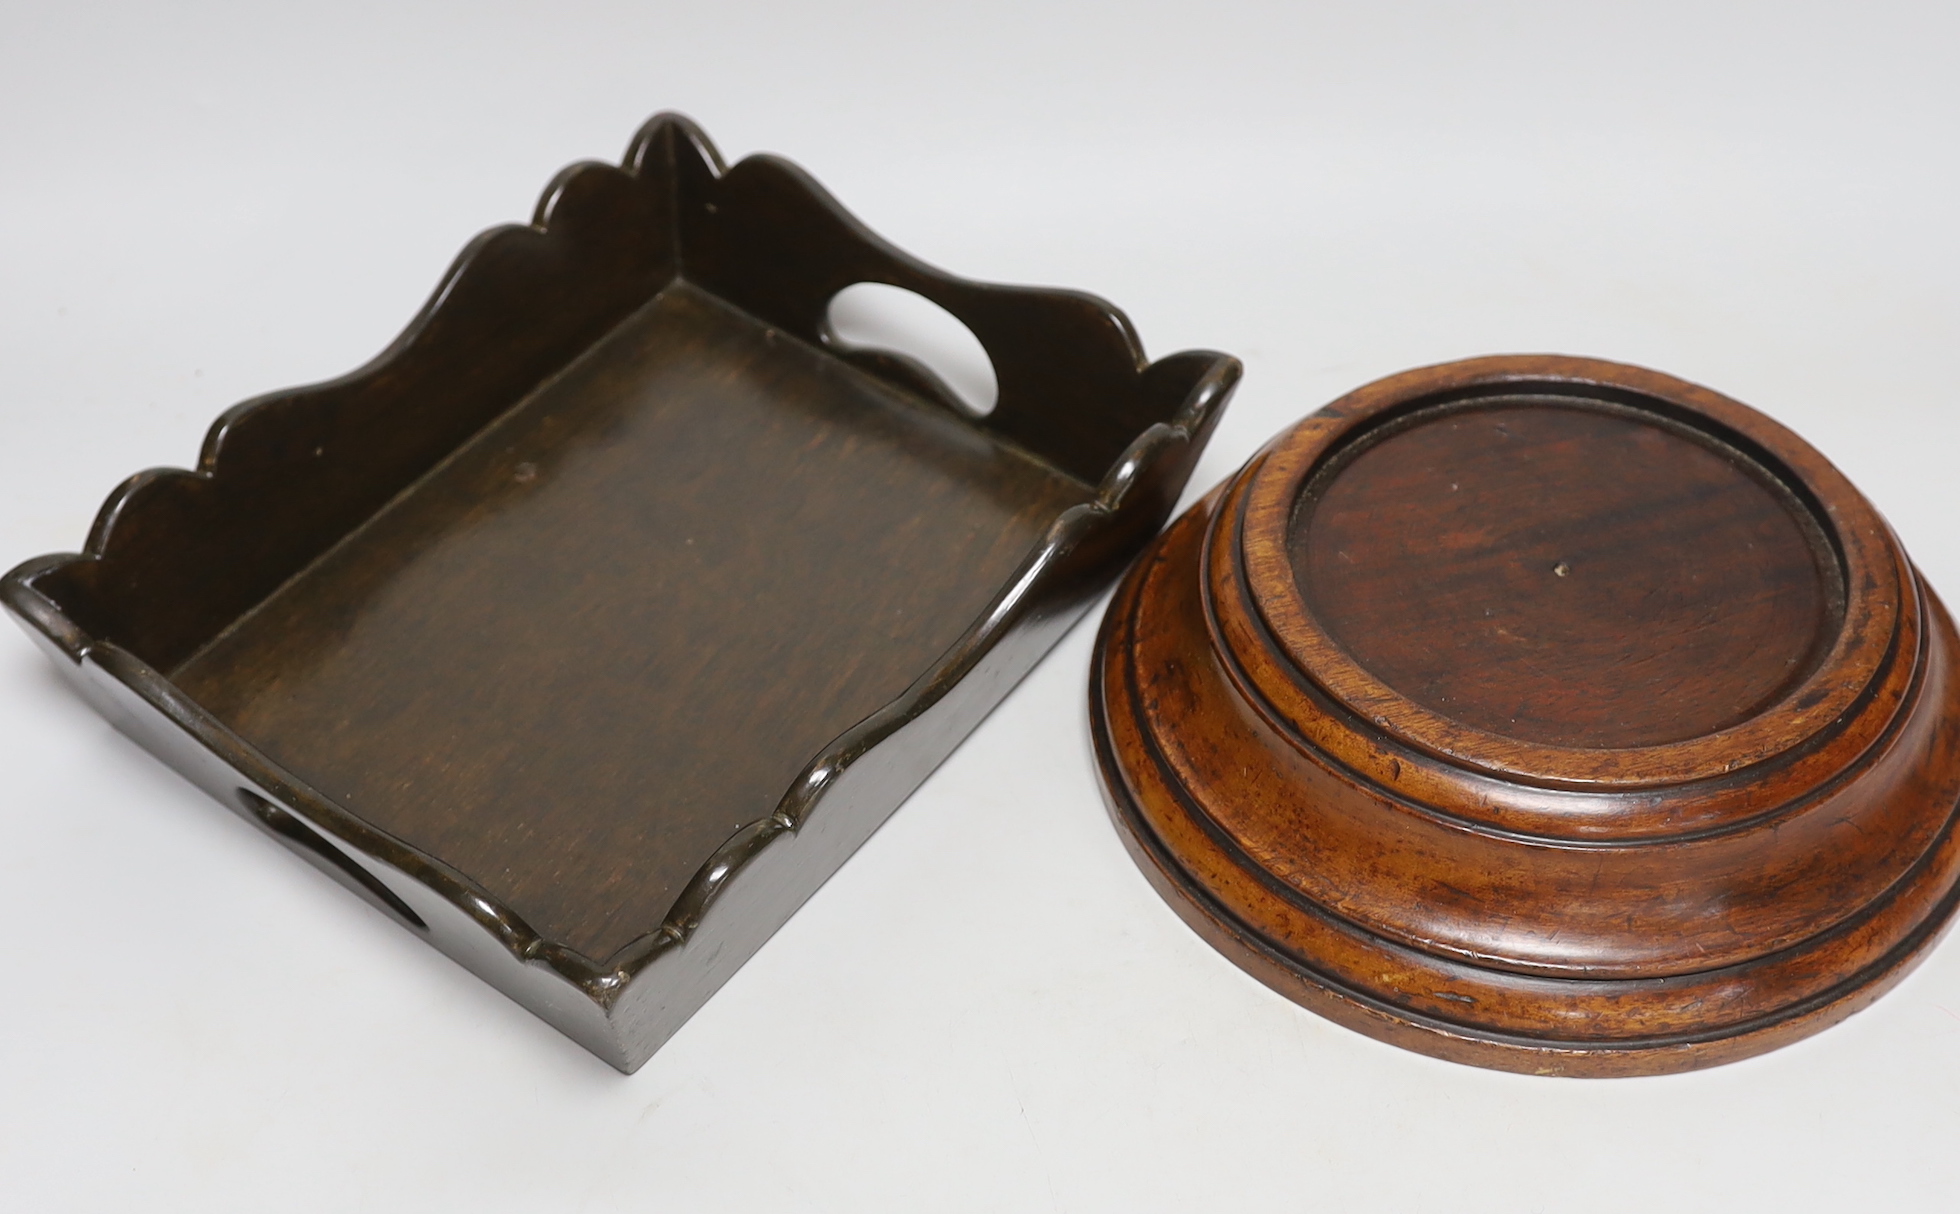 A pincushion stand with tray base, a mahogany vase stand and a hardwood mortar, tallest 22cm high - Image 2 of 4